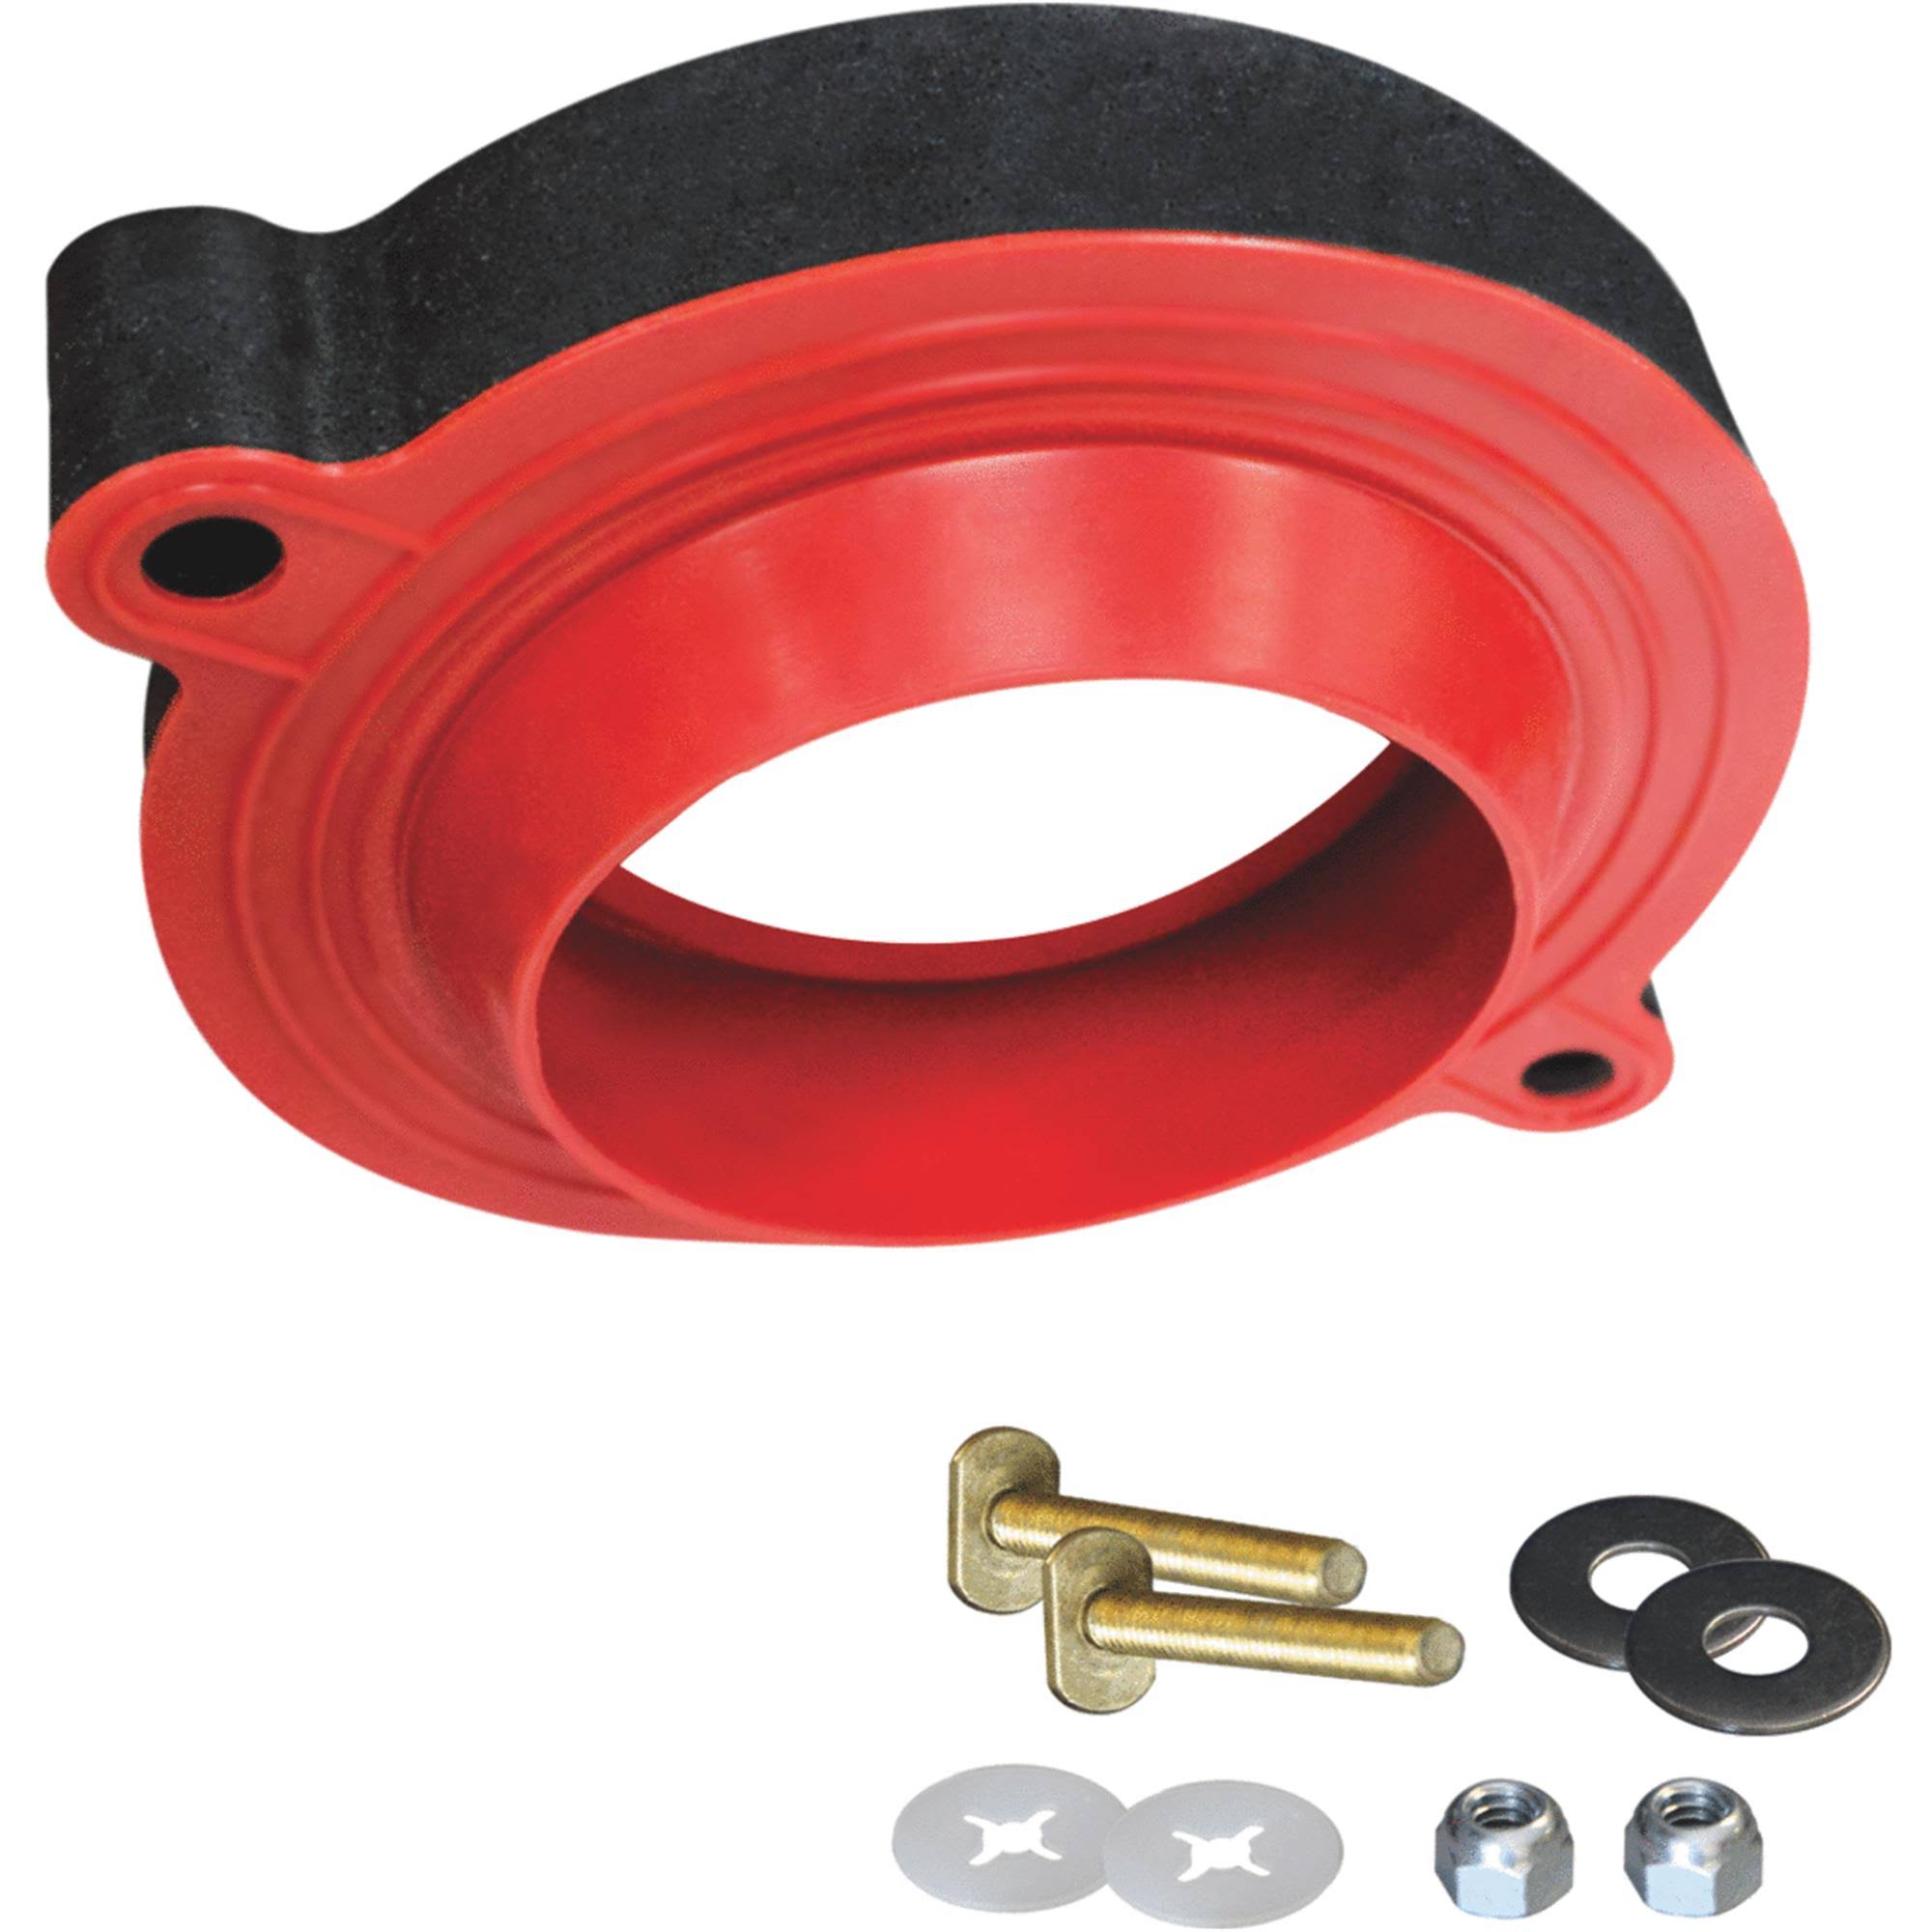 Lavelle Industries Toilet Wax Rubber Seal Kit With Hardware - Red